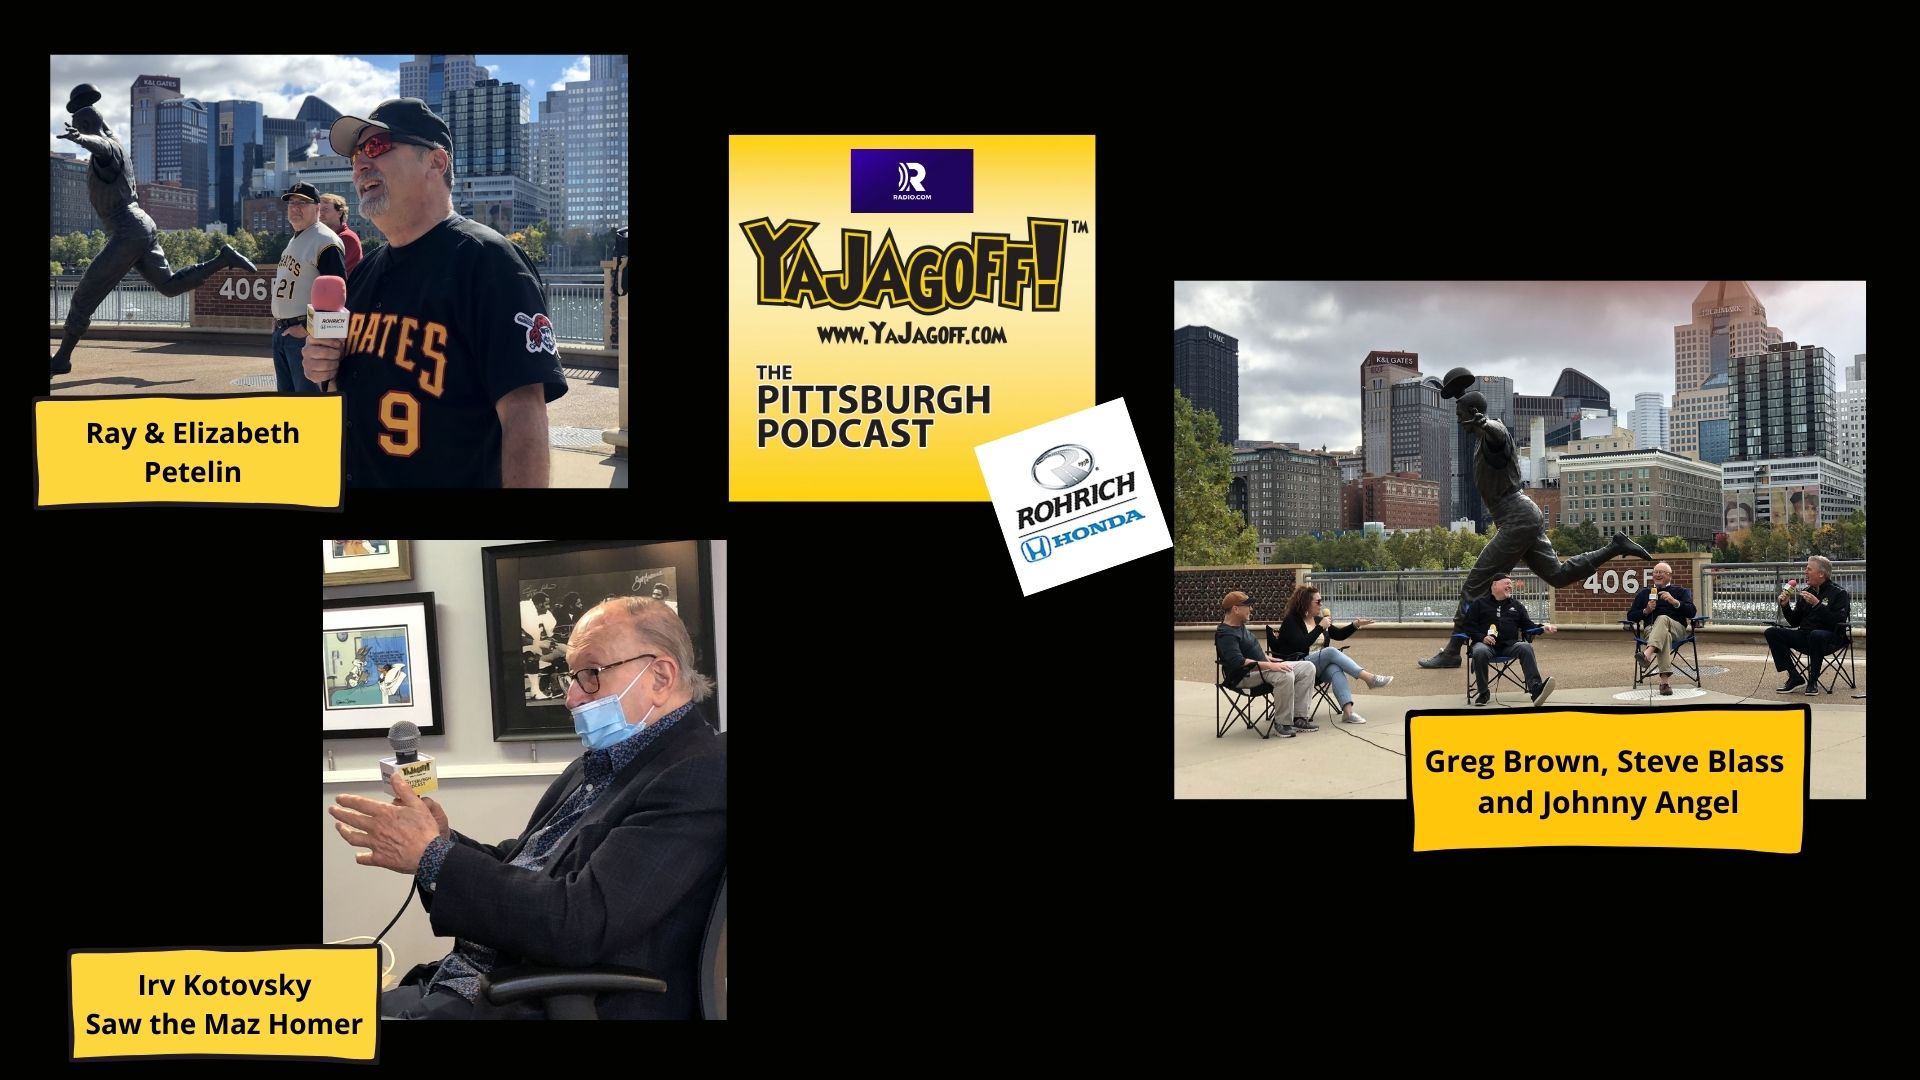 YaJAgoff Podcast of Pittsburgh